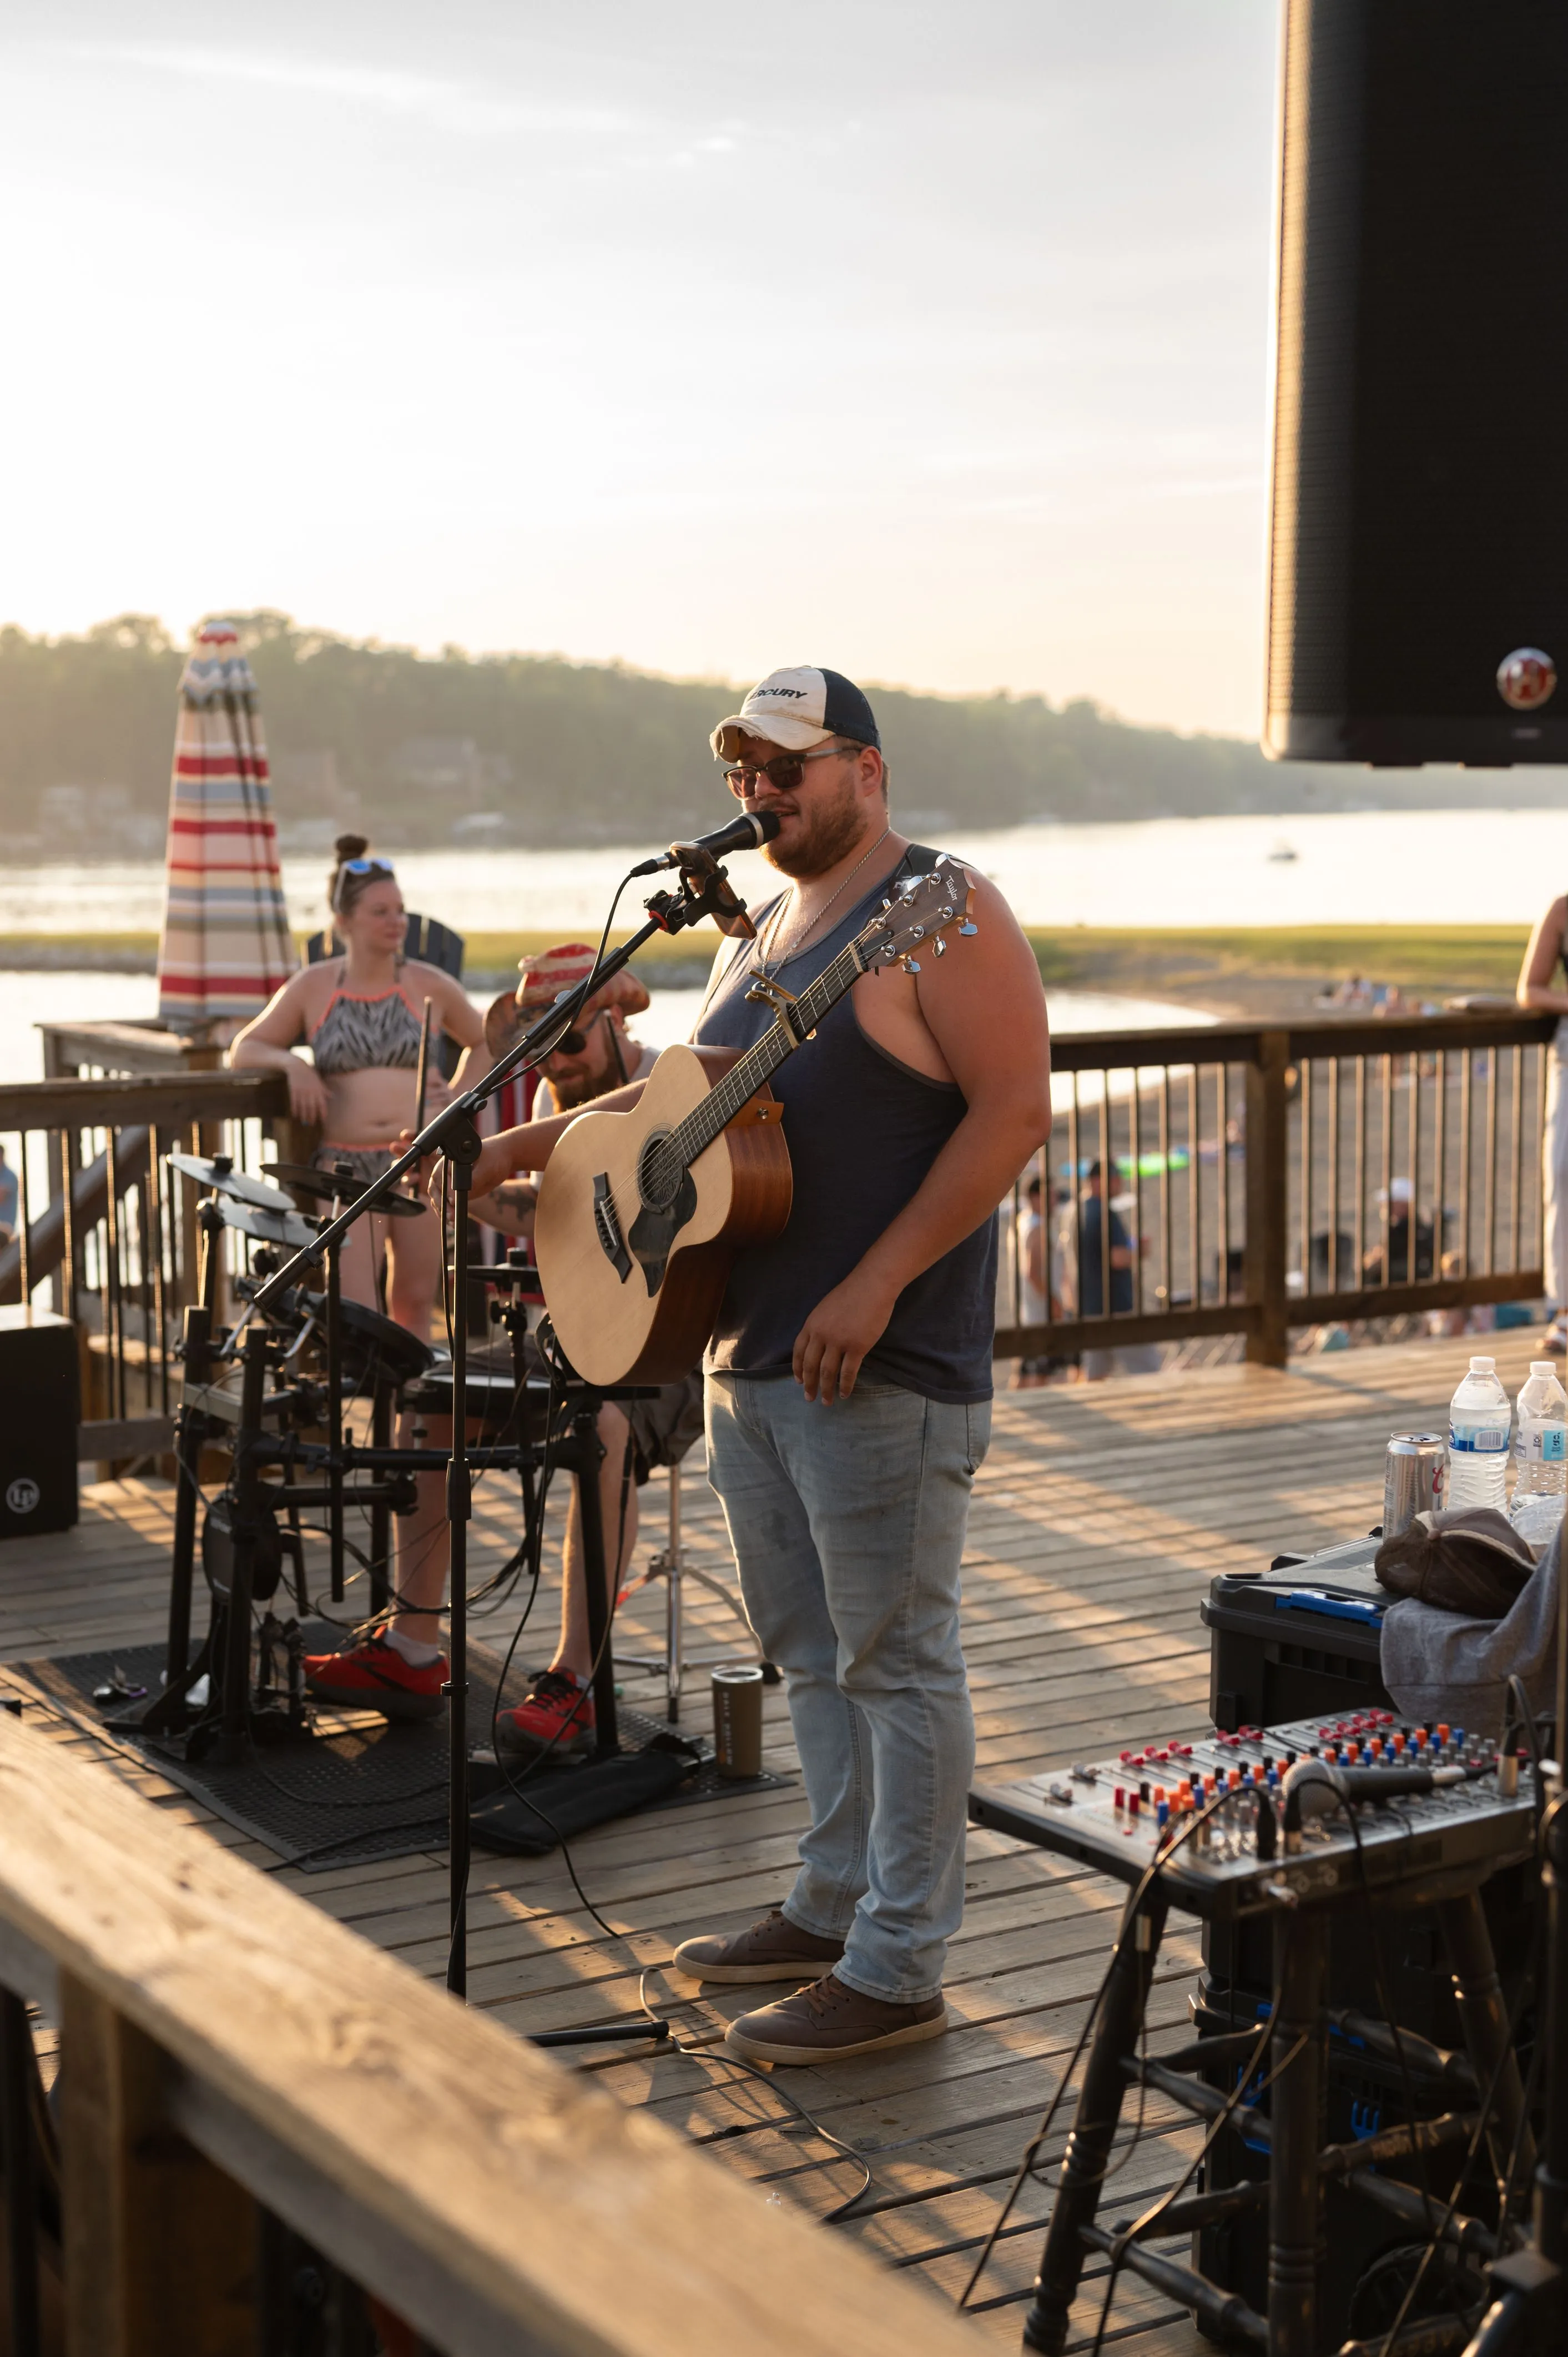 Man performing with a guitar on an outdoor deck overlooking a body of water with a lighthouse in the background.